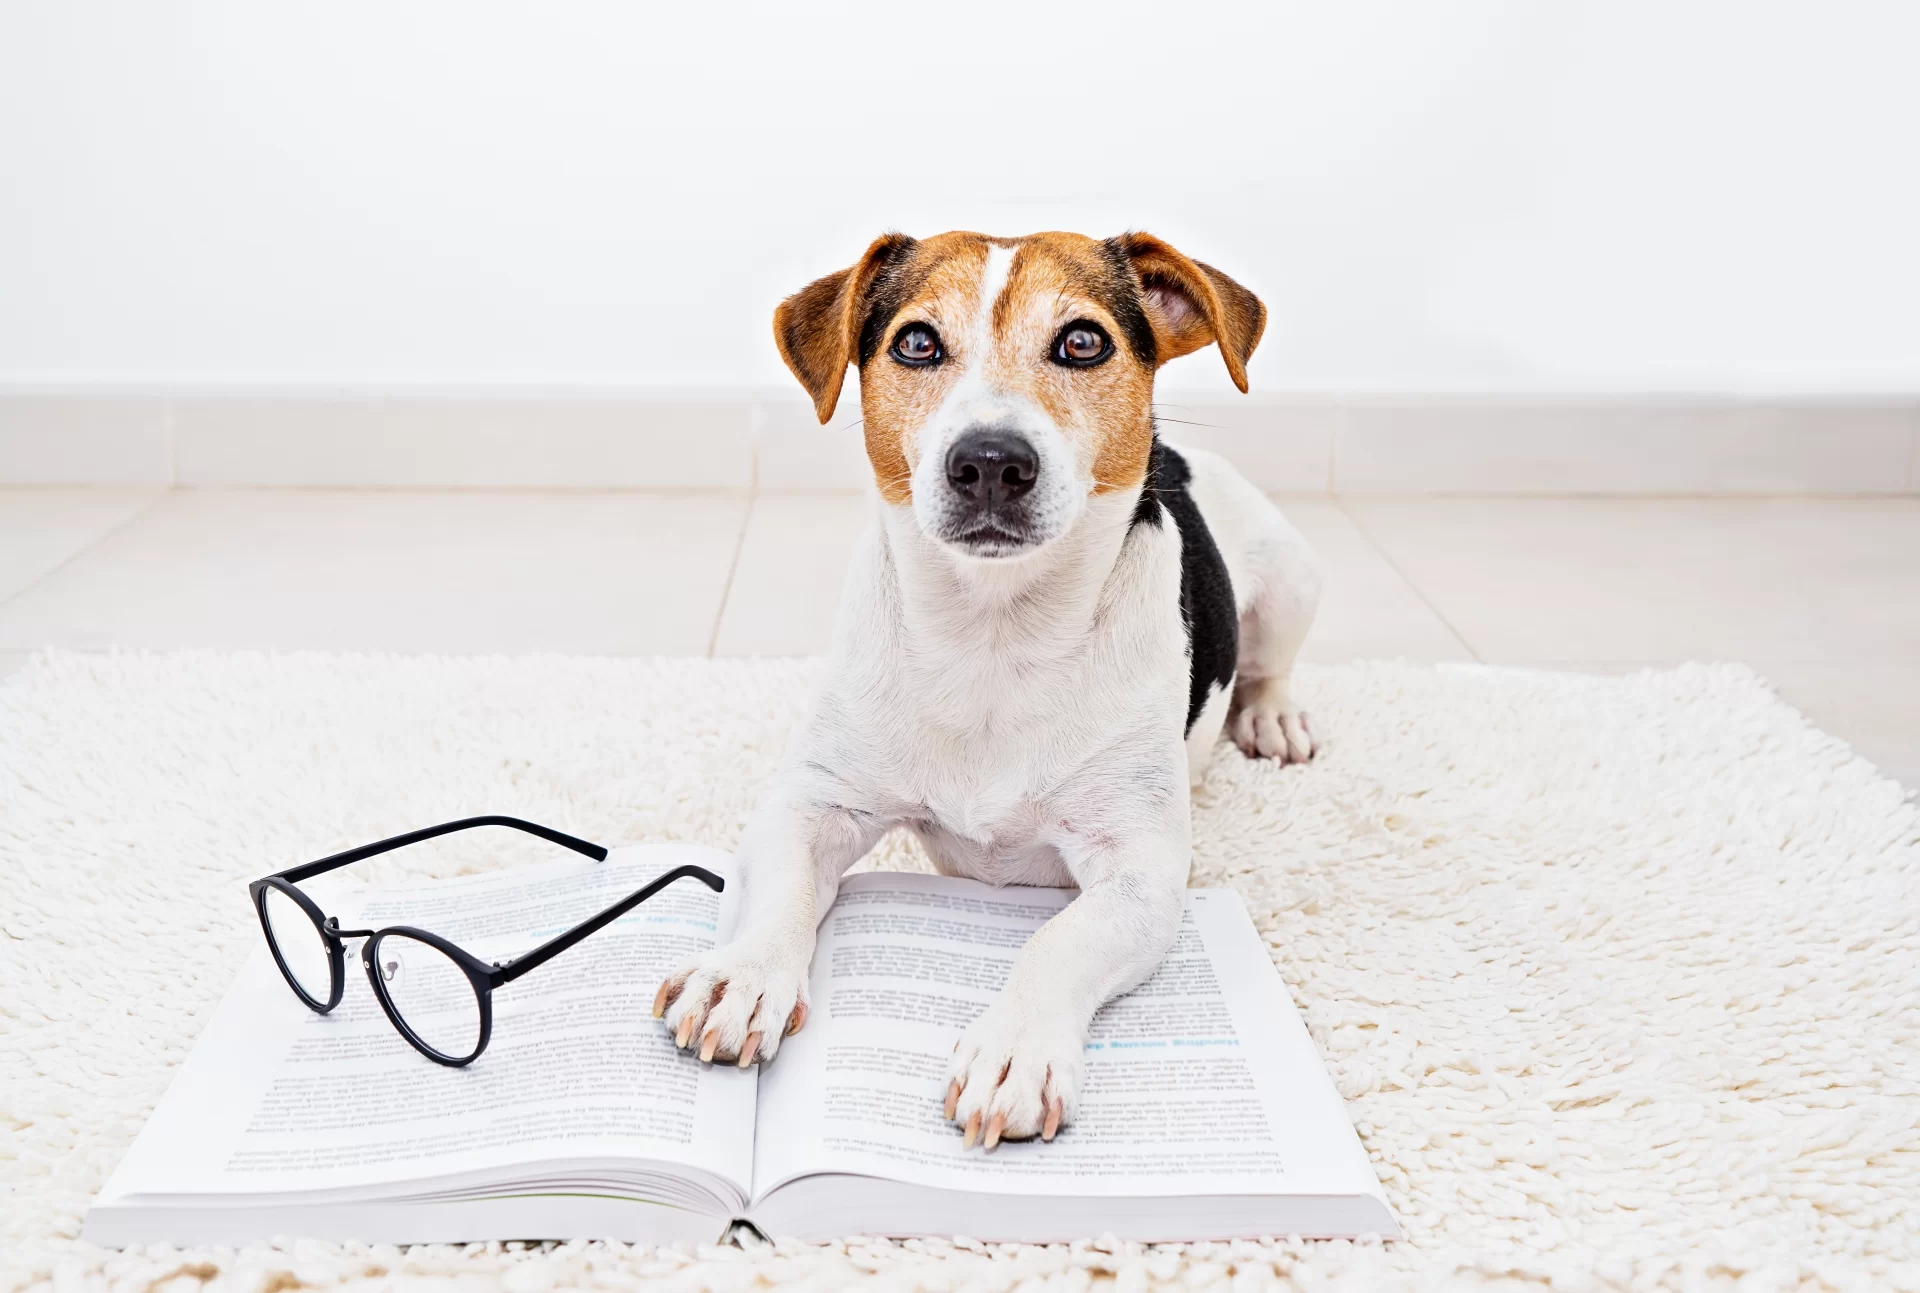 Dog with paws and glasses on book. South African pet laws. Pets24